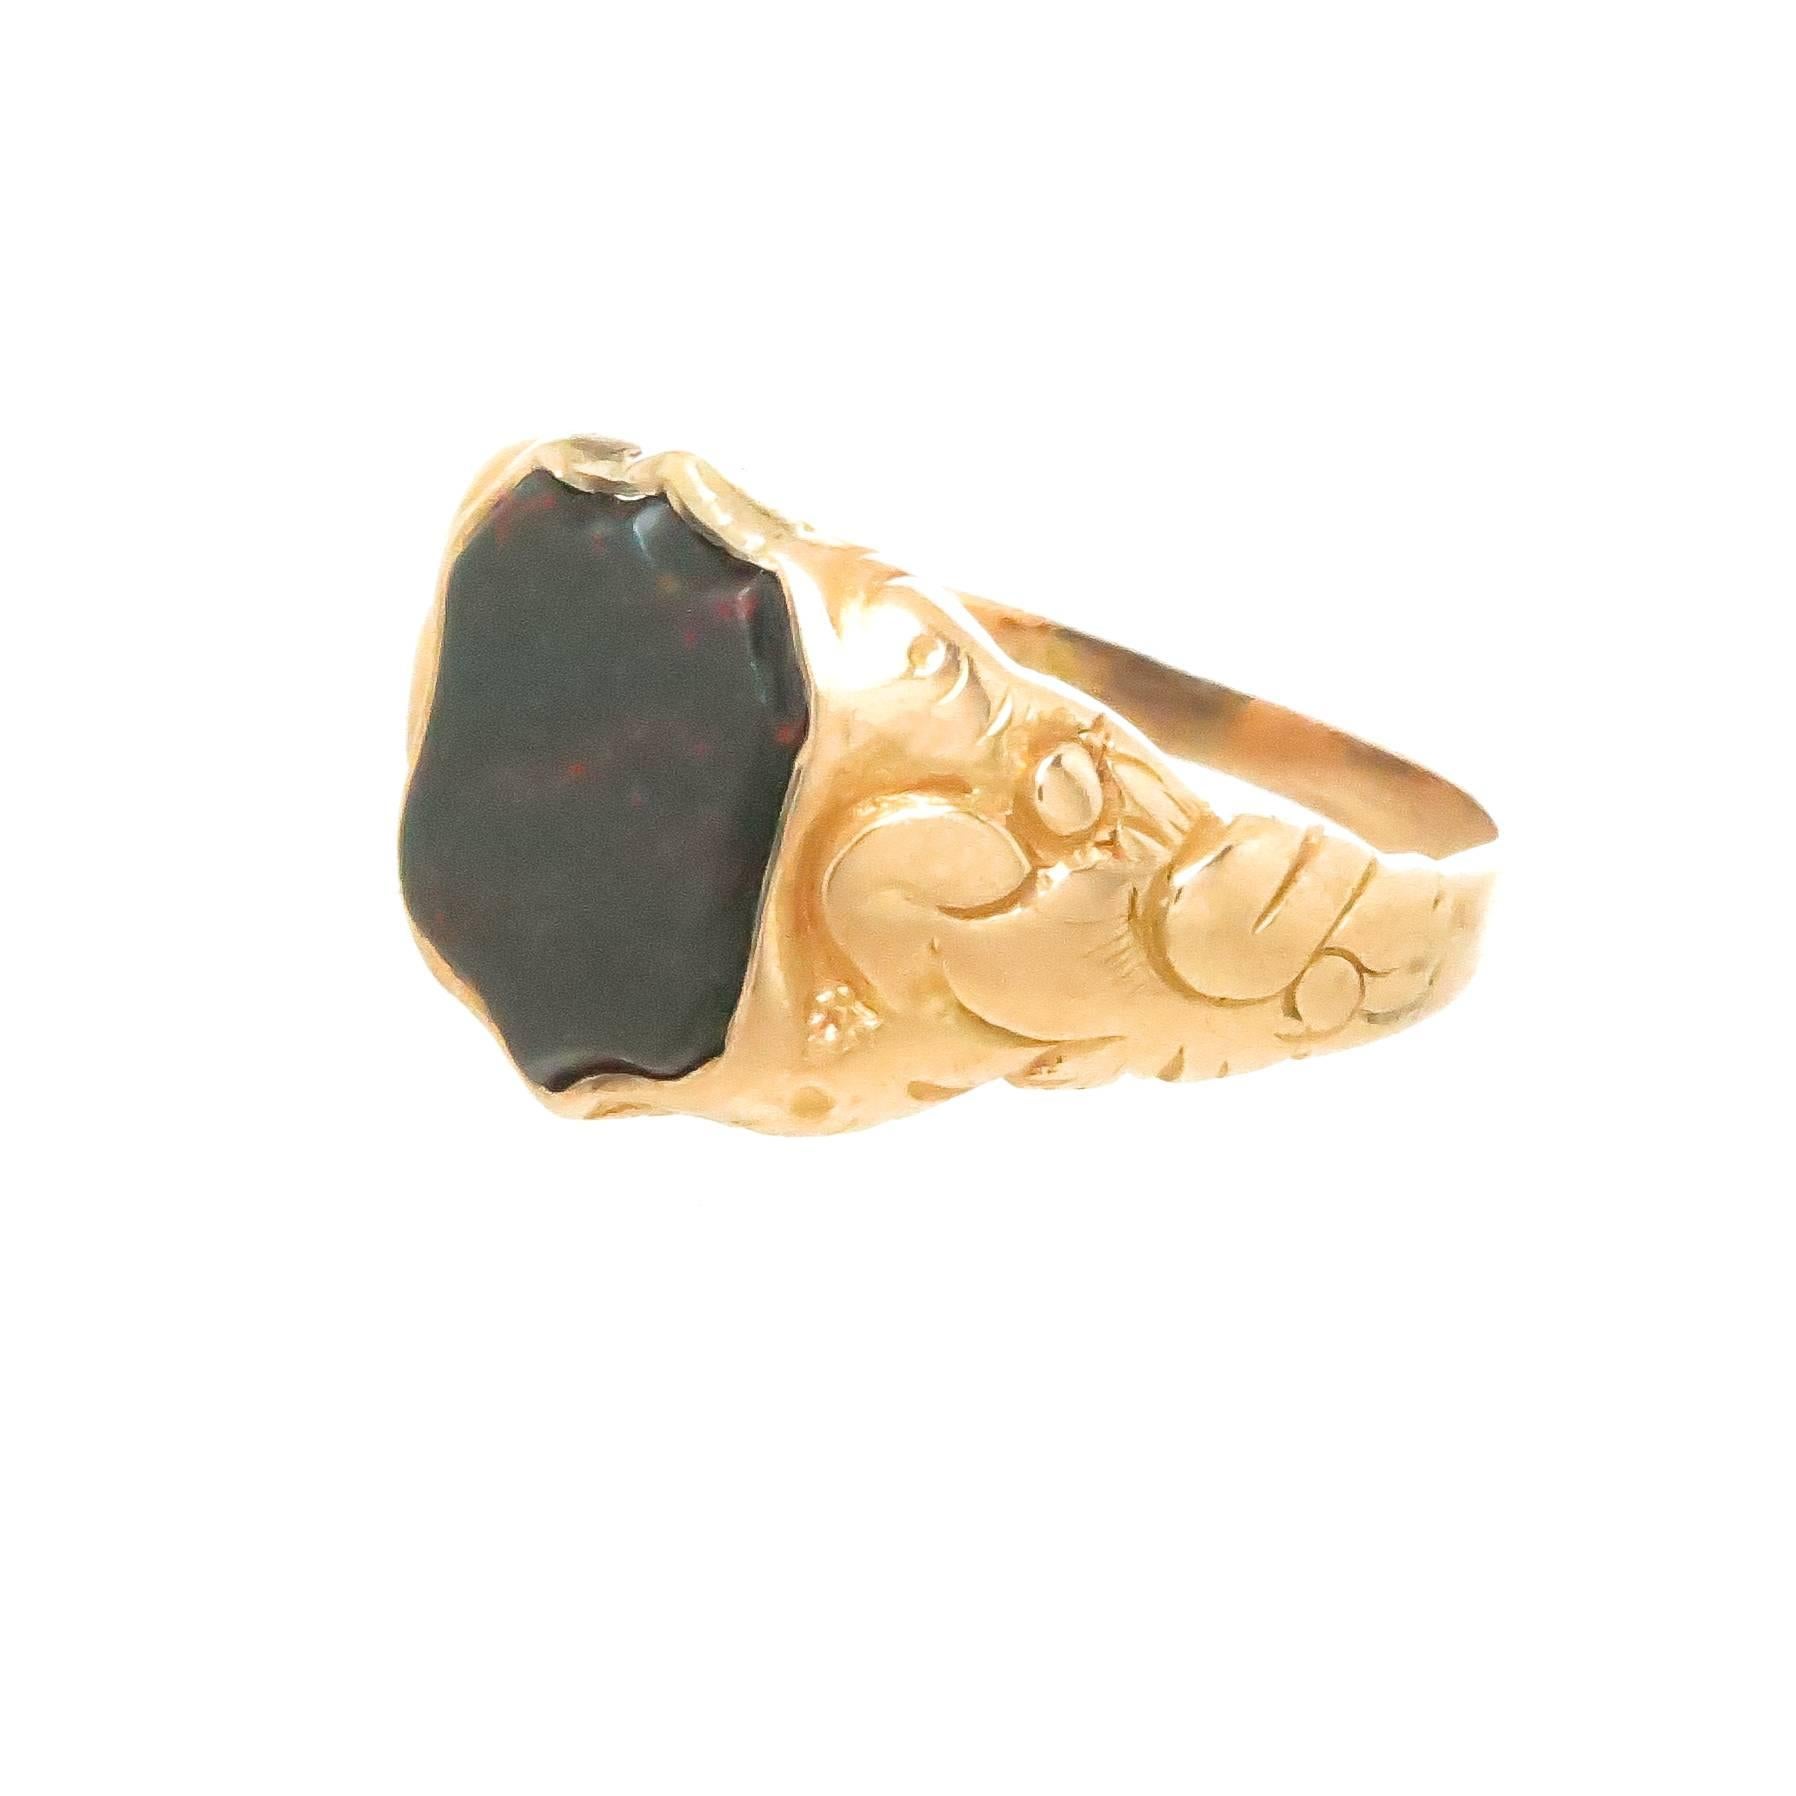 Circa 1880 - 1900 15K Yellow Gold Ring, having high relief floral design work and centrally set with a shield shape Blood Stone measuring 3/8 X 3/8 inch. Having partial English stamps, finger size 6 3/4.